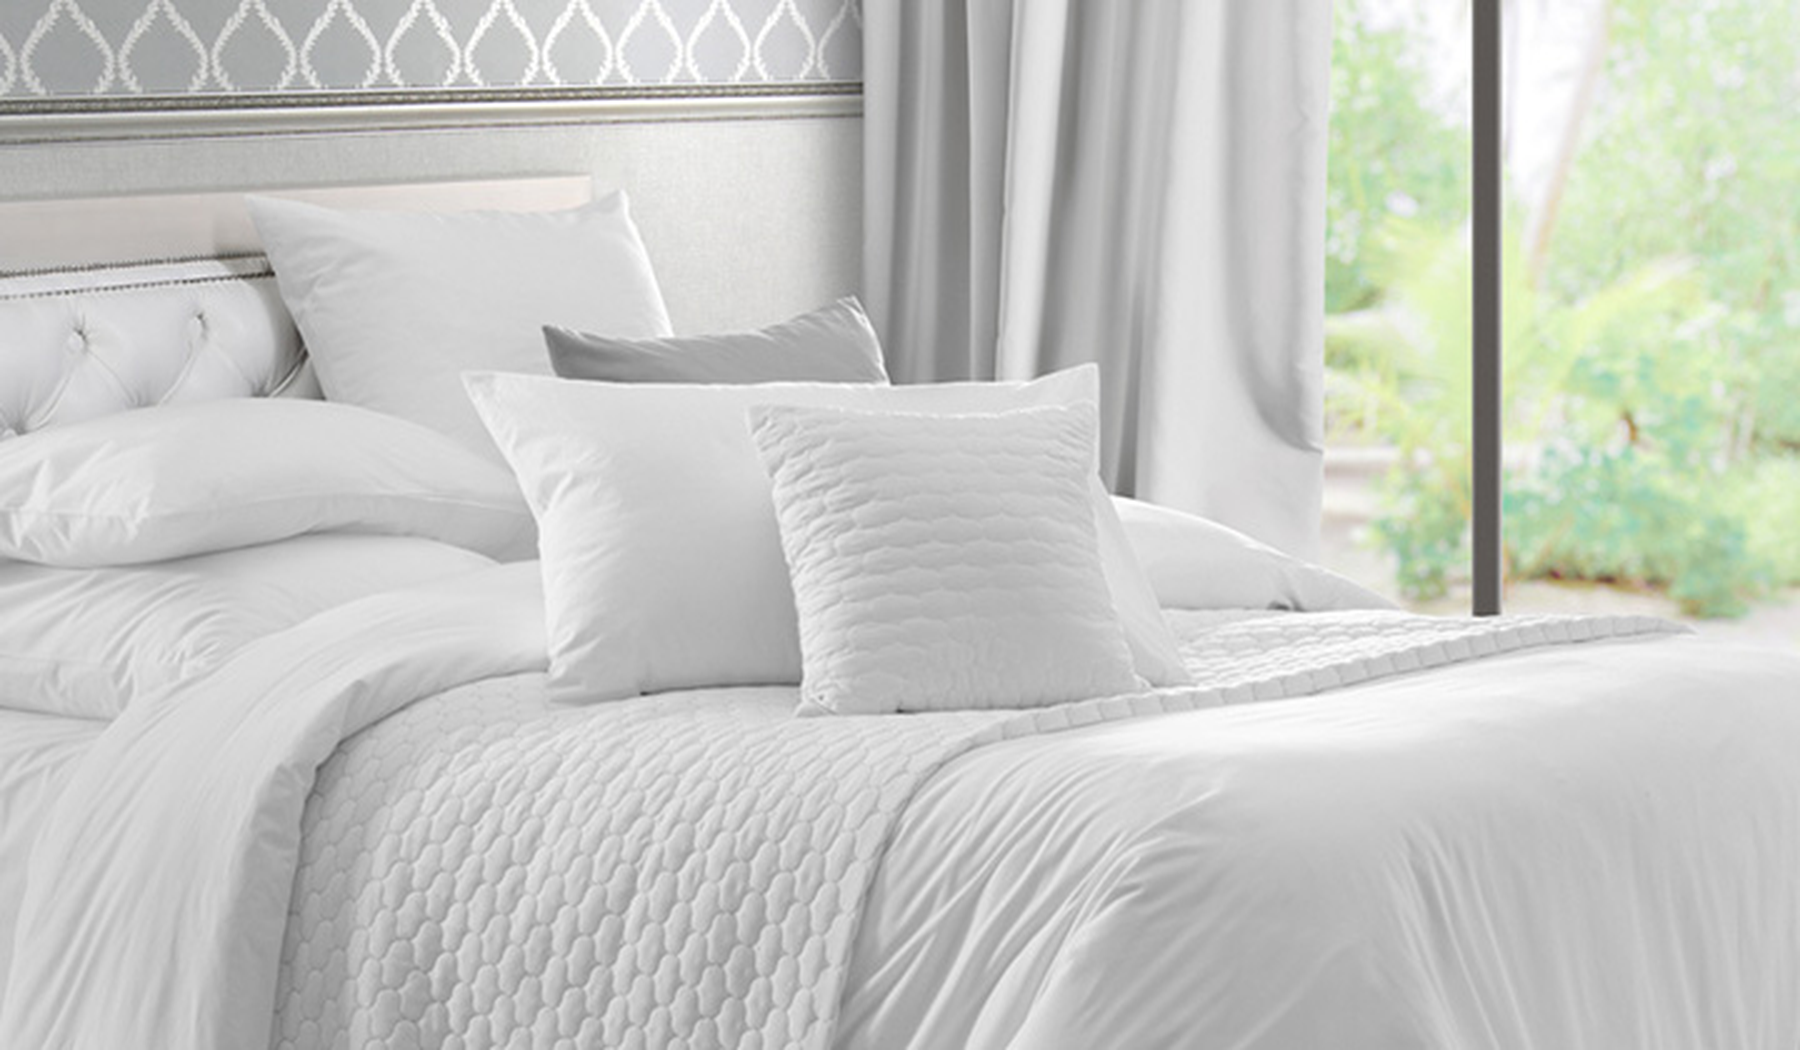 A bed with white and gray bedding